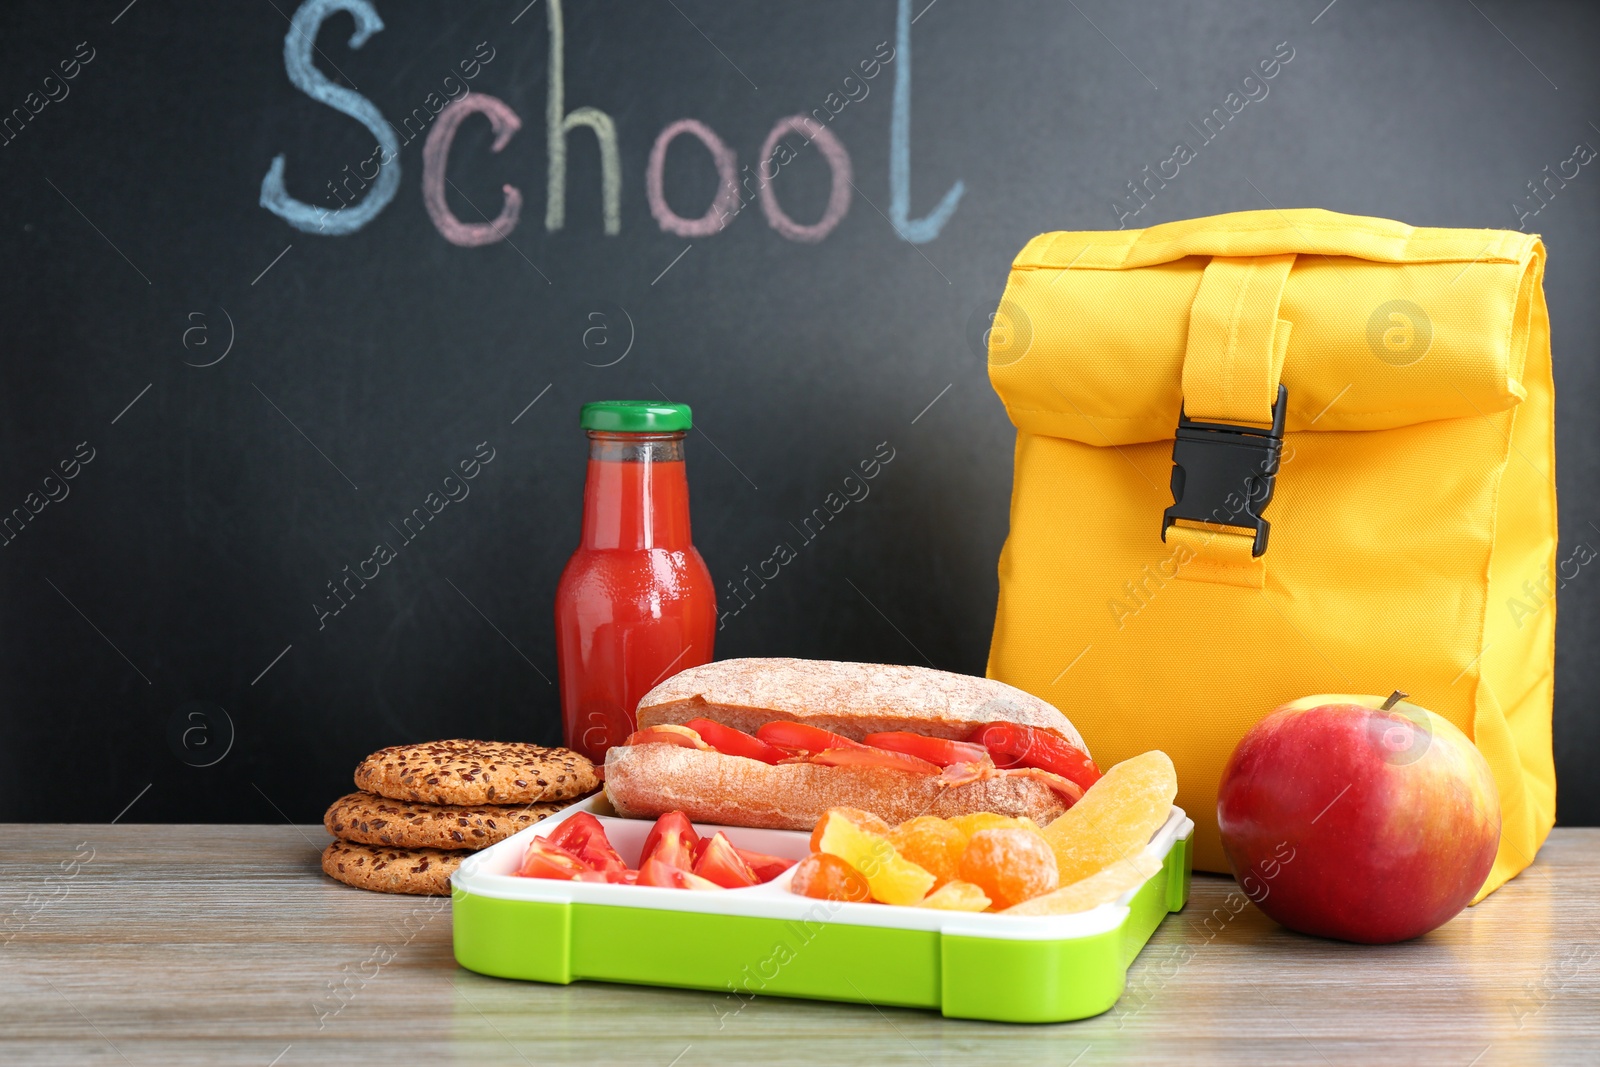 Photo of Appetizing food in lunch box and bag on table near chalkboard with word SCHOOL